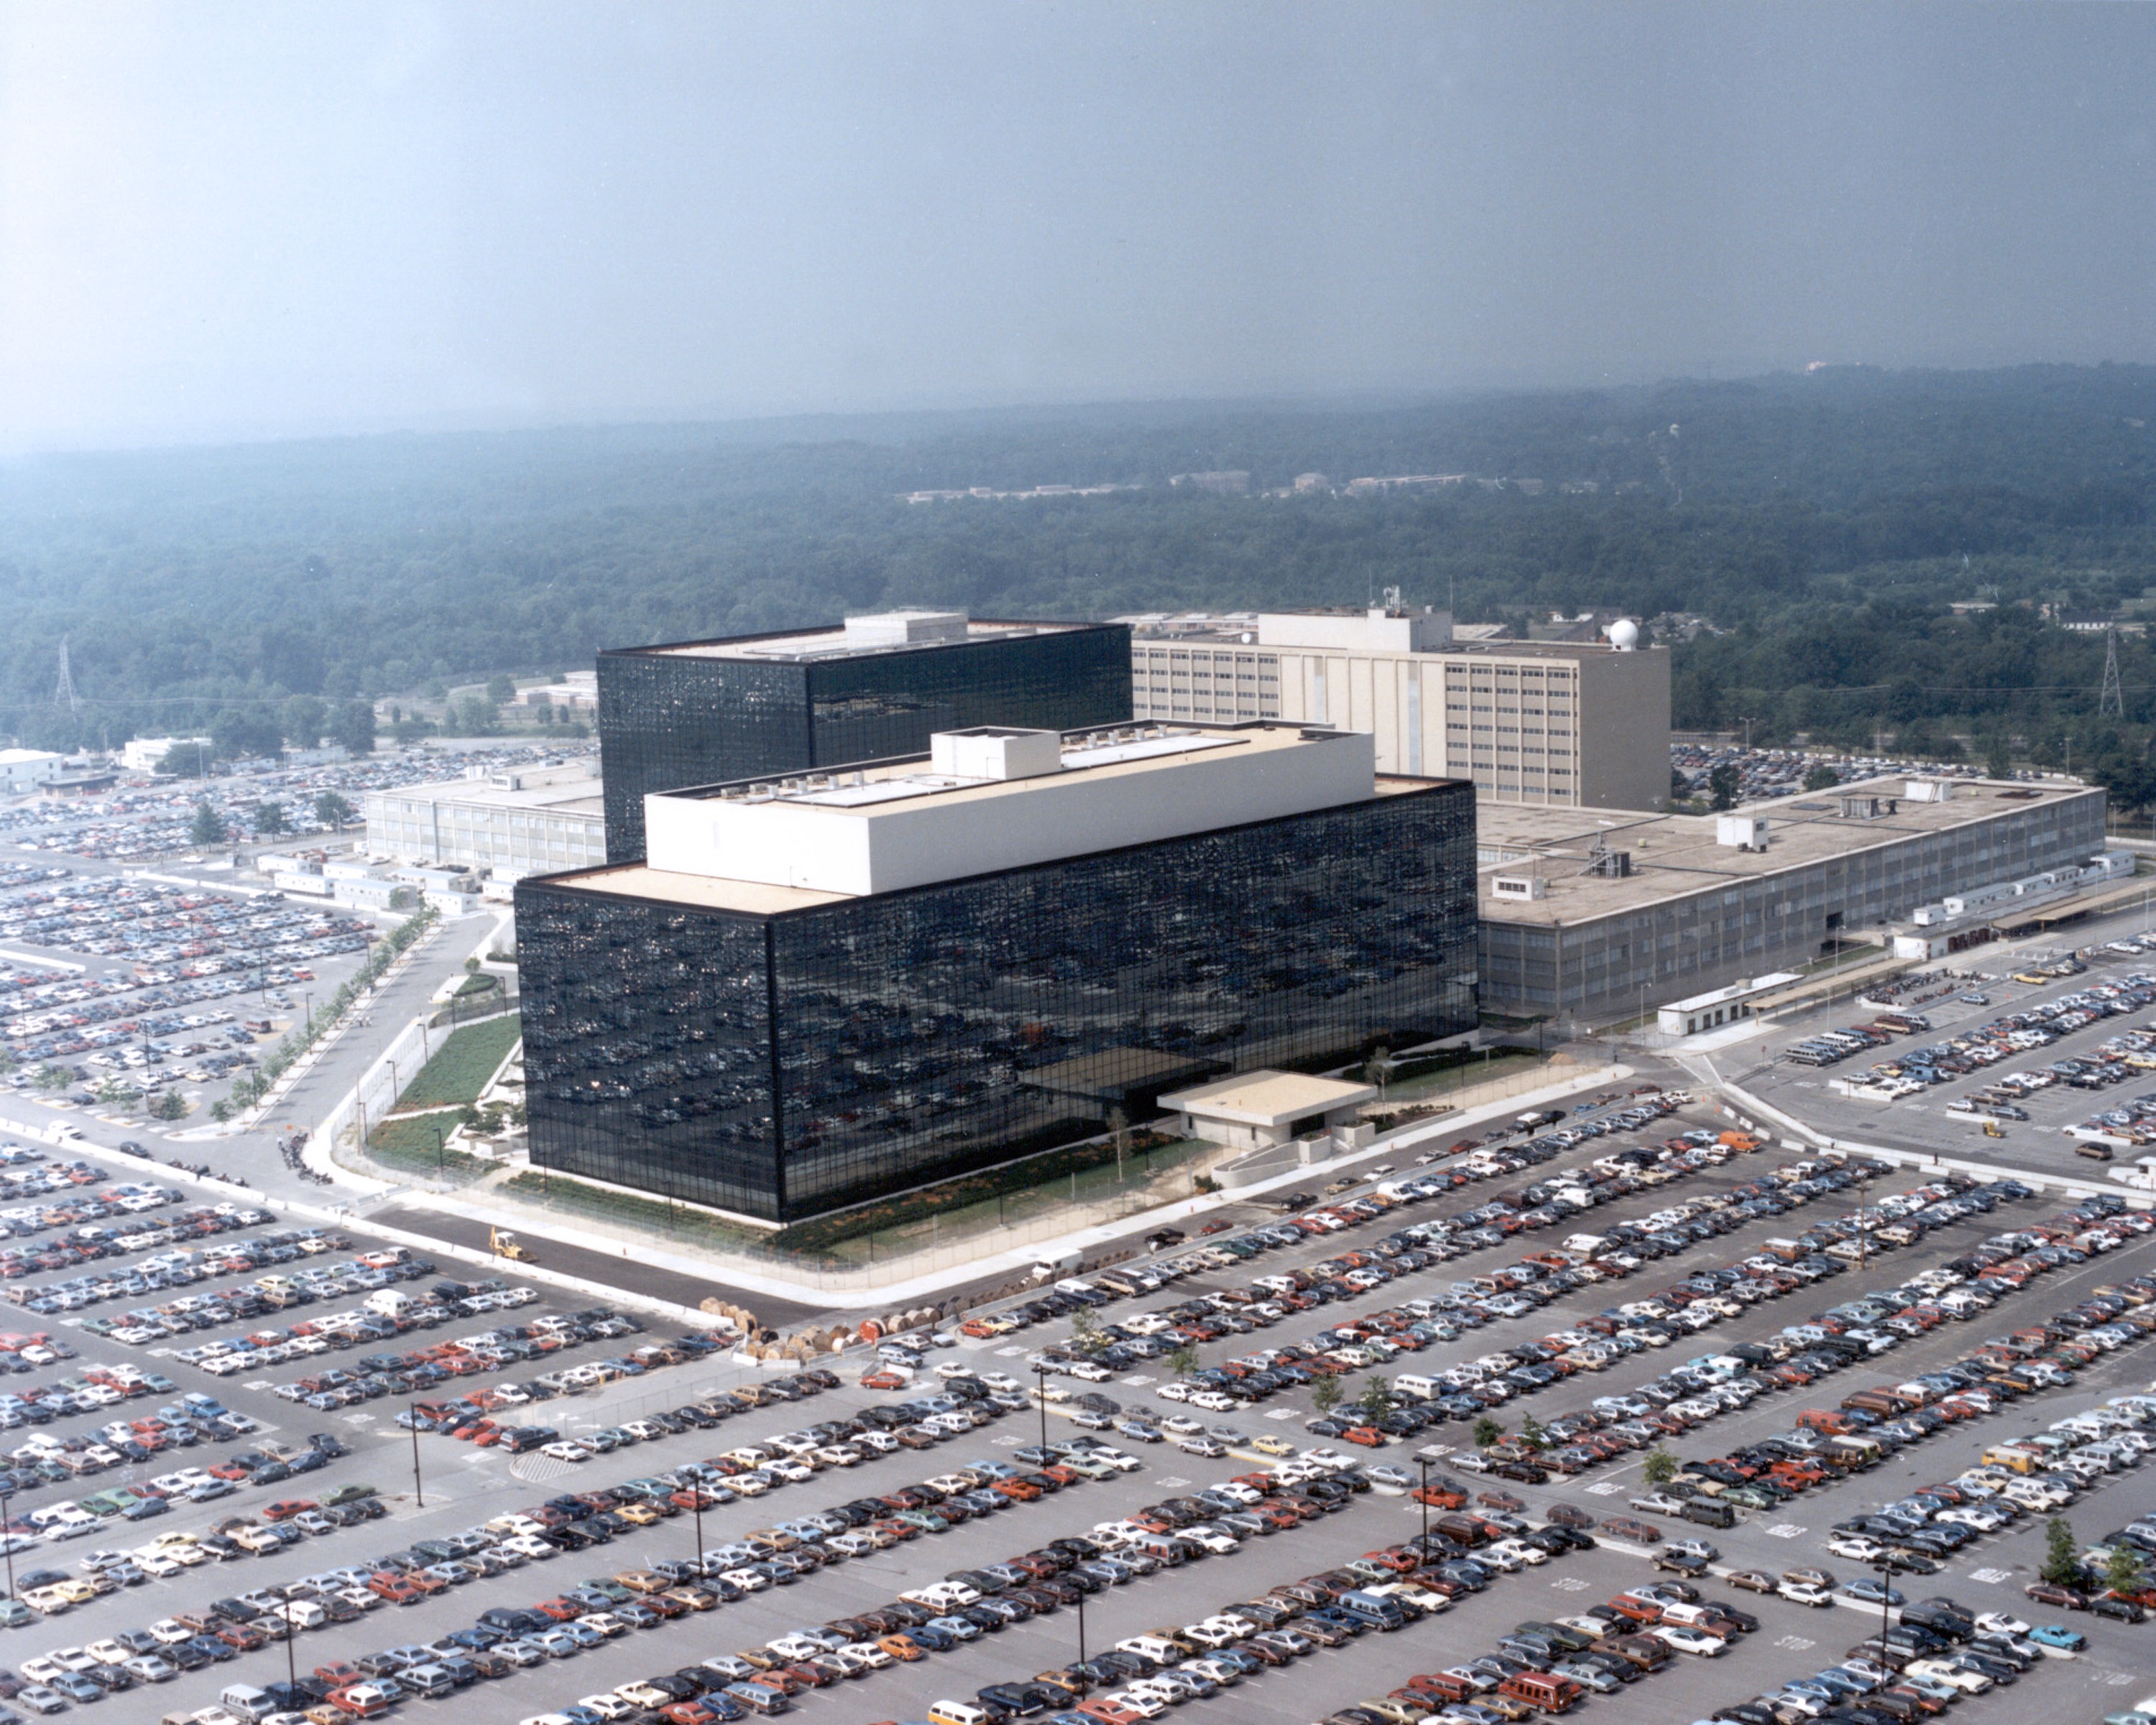 The headquarters of the NSA in Fort Meade, Maryland. (Courtesy of the NSA)